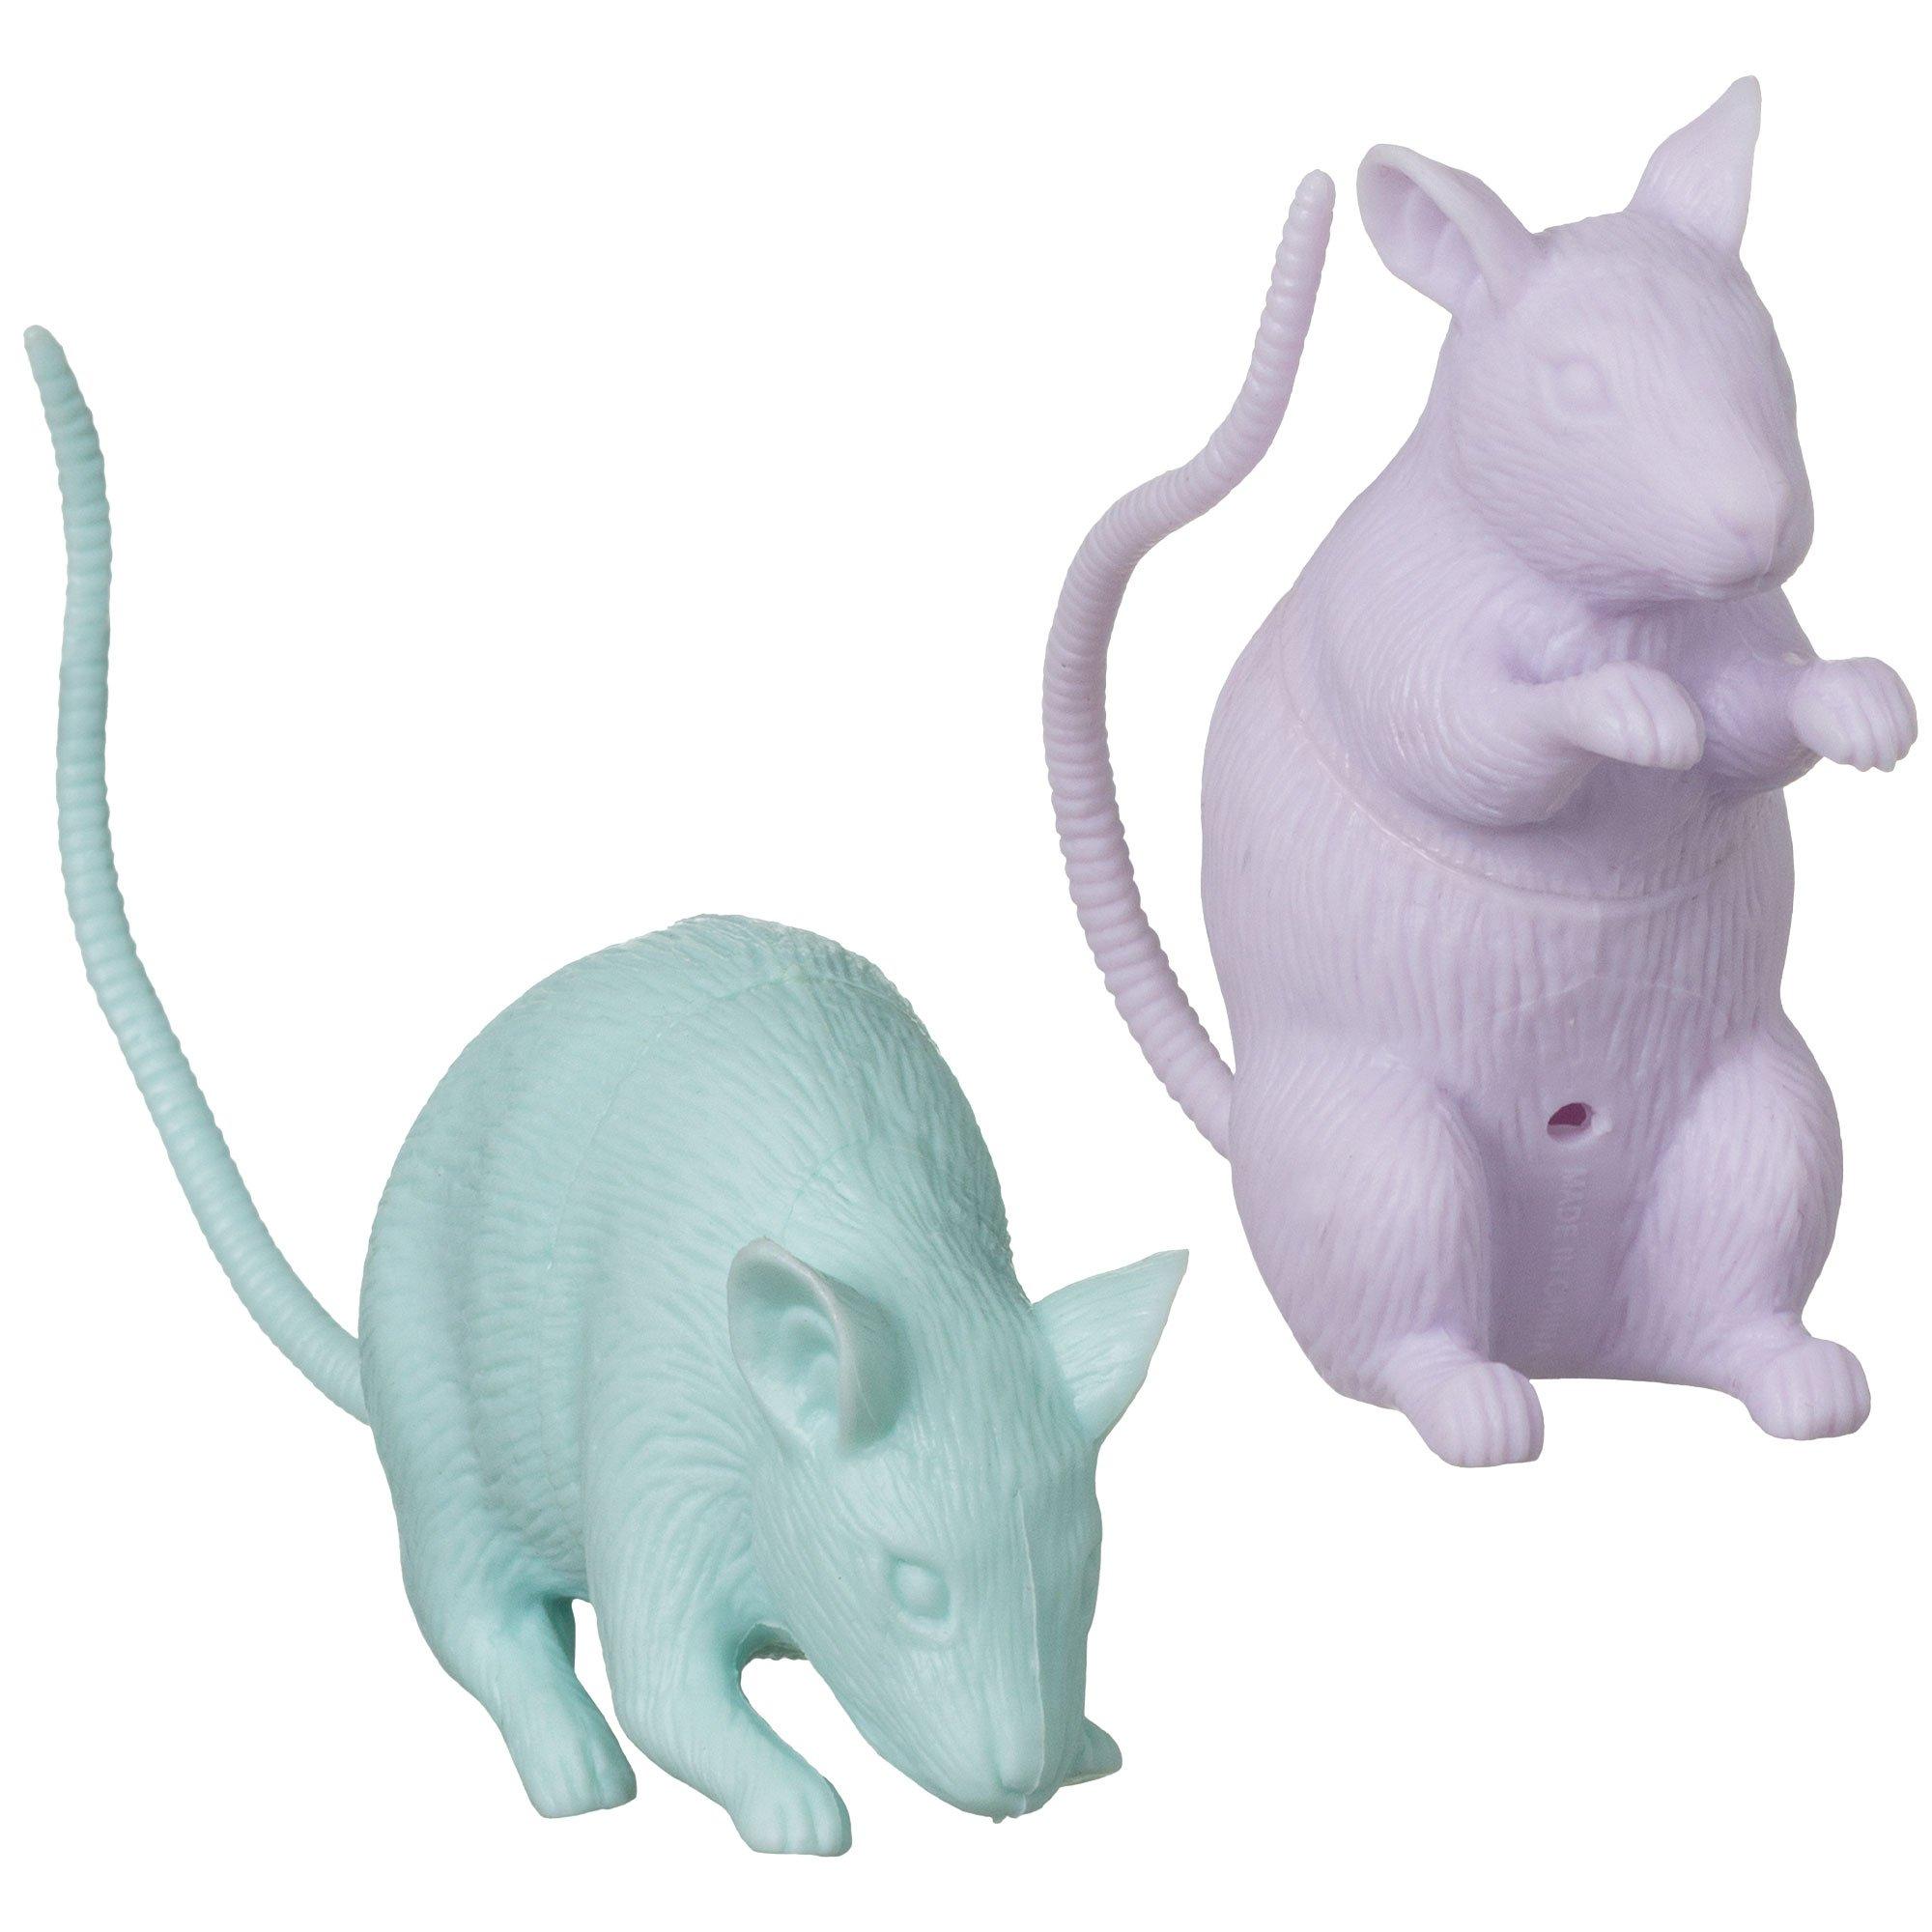 Small Pastel Plastic Rats, 3in, 18ct